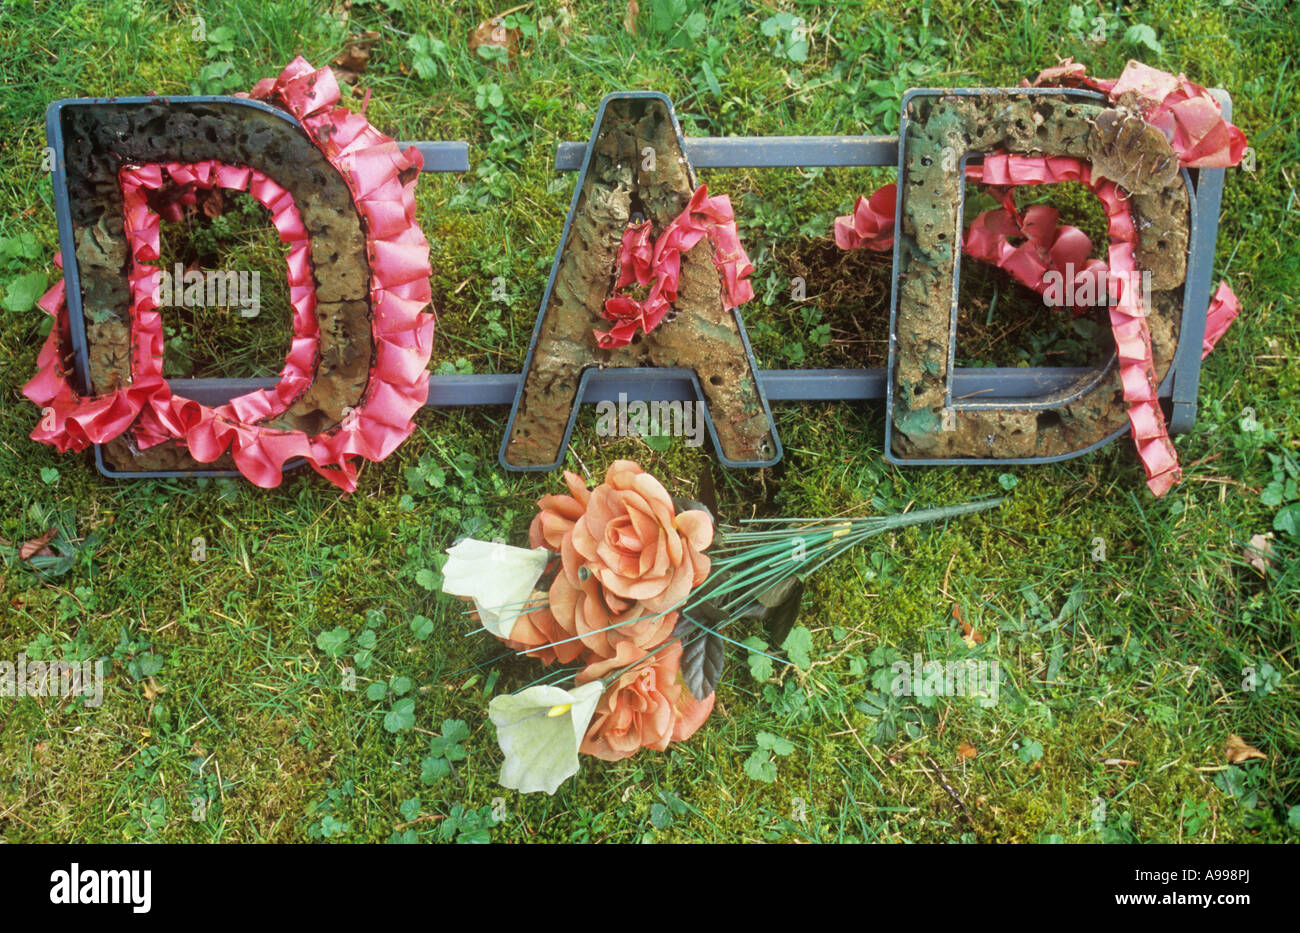 Plastic frame used to hold flowers and placed on coffins or graves stating DAD but now breaking with decorations lying on grass Stock Photo